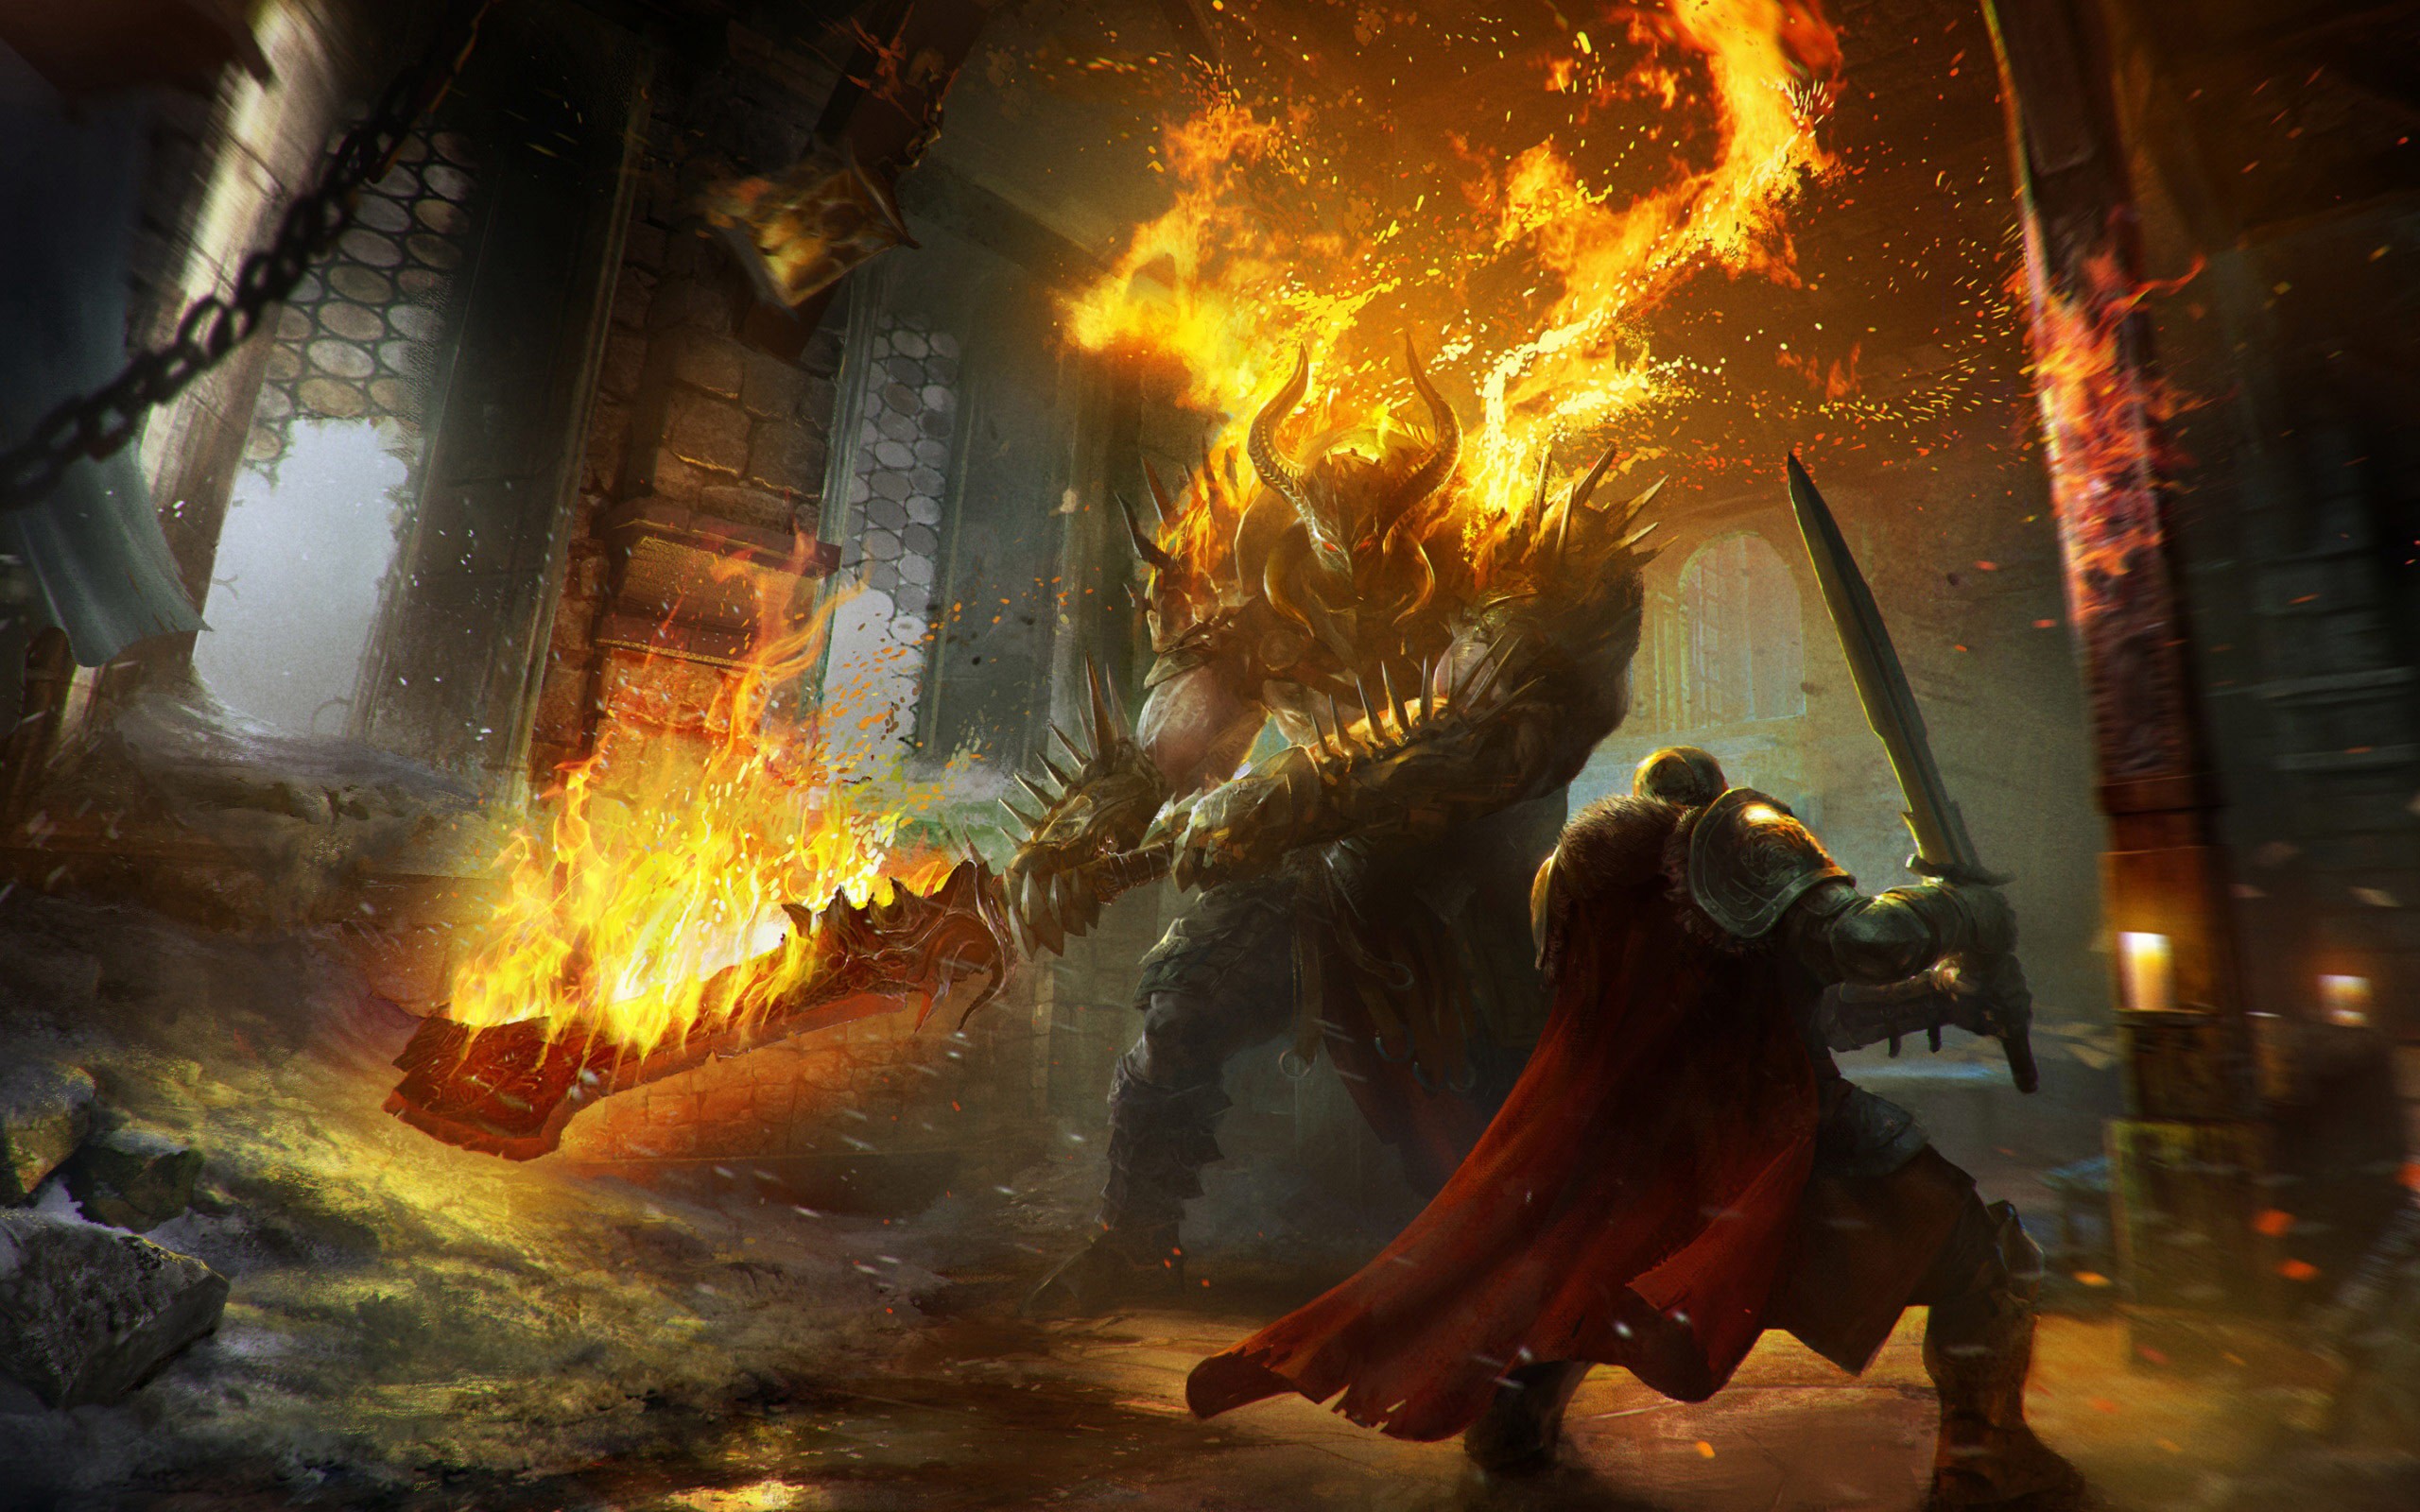 General 2560x1600 Lords of the Fallen artwork fantasy art demon knight video games PC gaming video game art creature sword fire burning